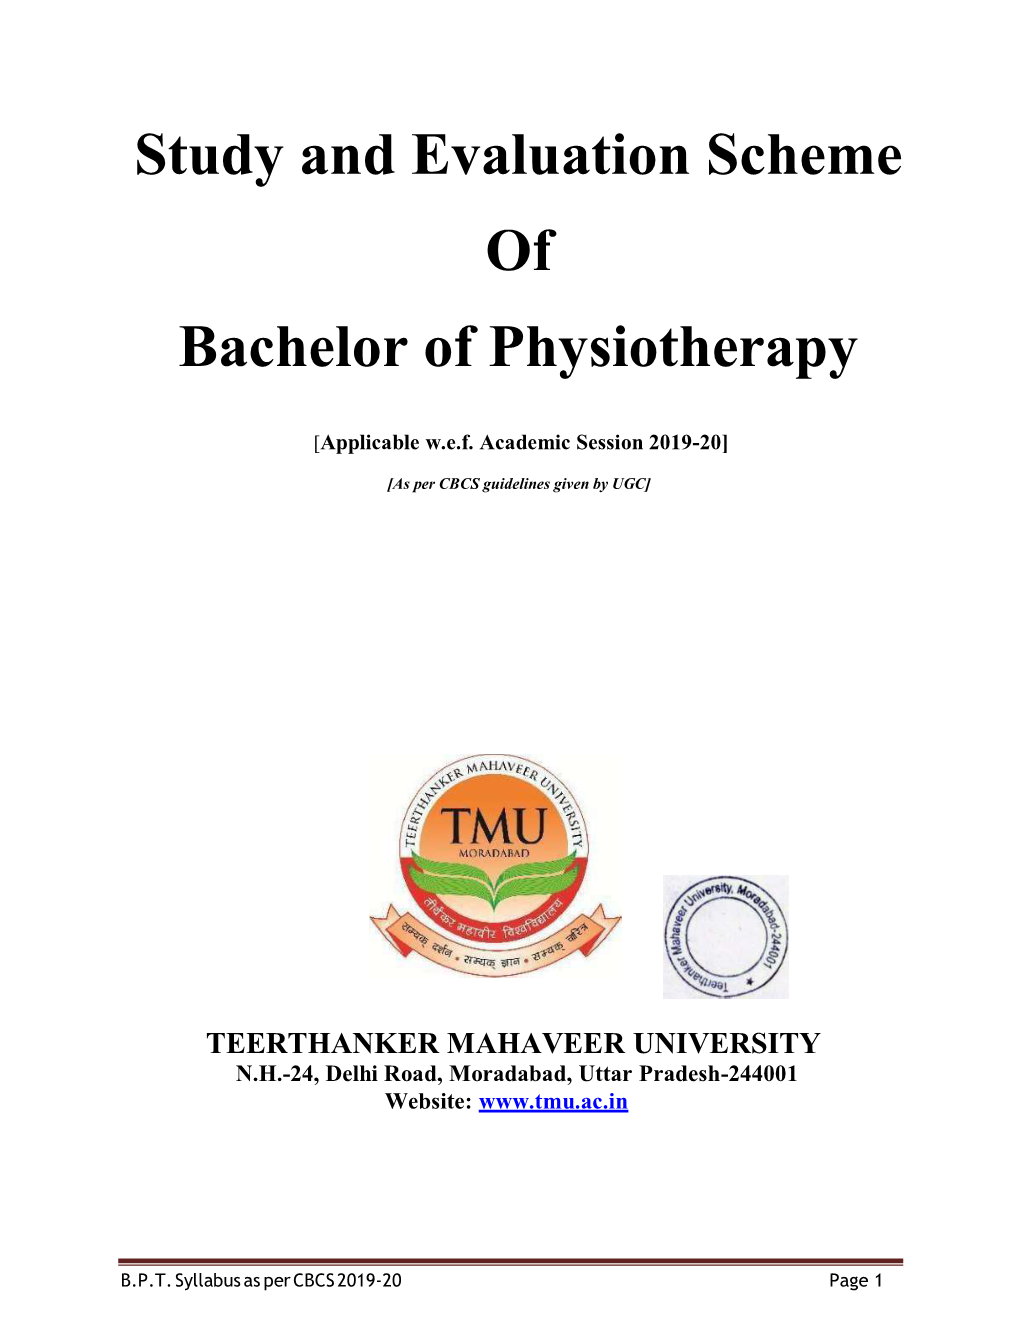 Study and Evaluation Scheme of Bachelor of Physiotherapy